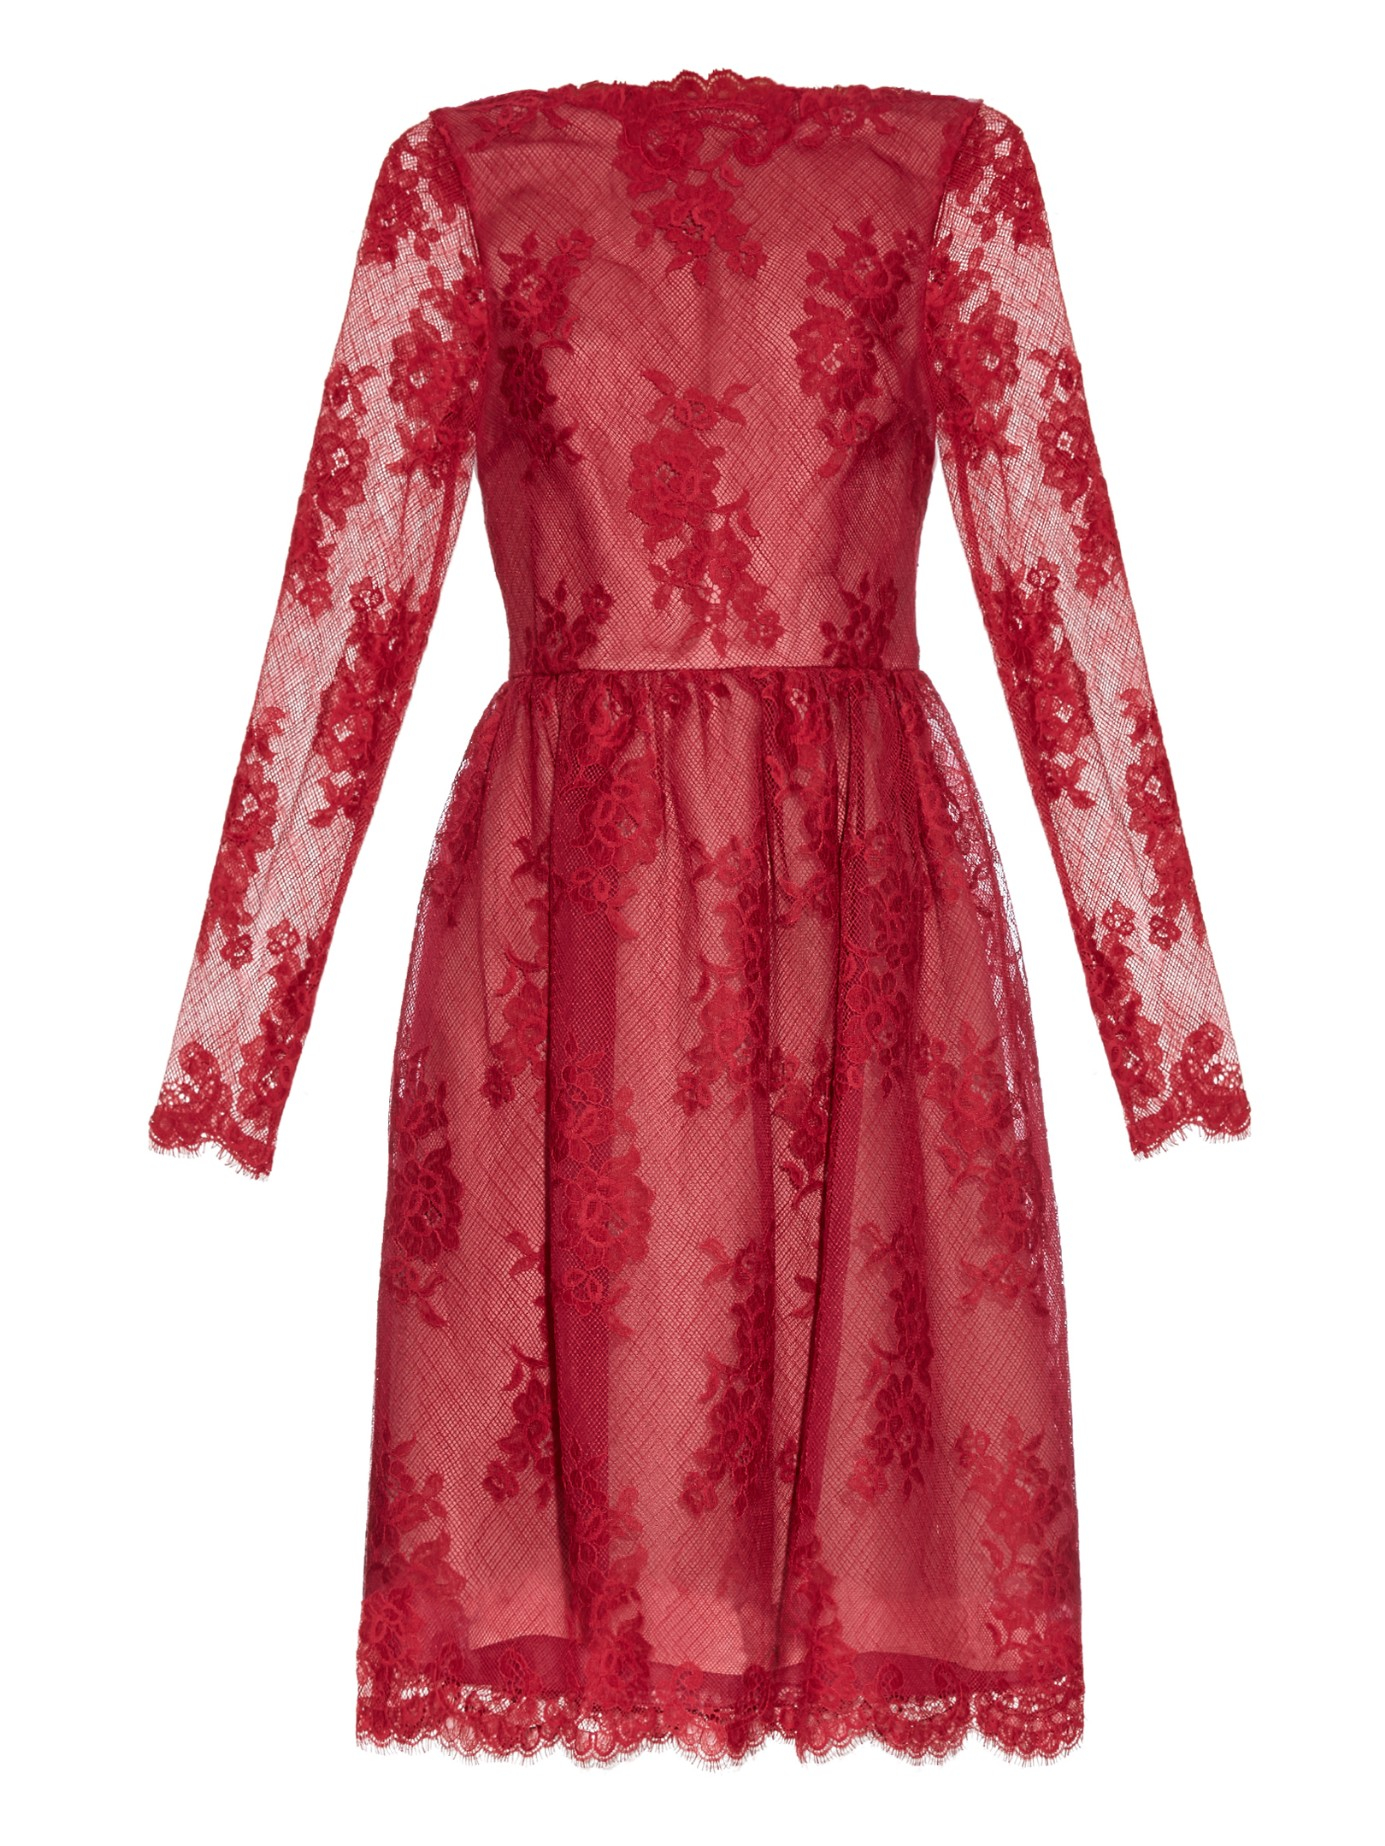 Erdem Dolores Floral-lace Dress in Red - Lyst